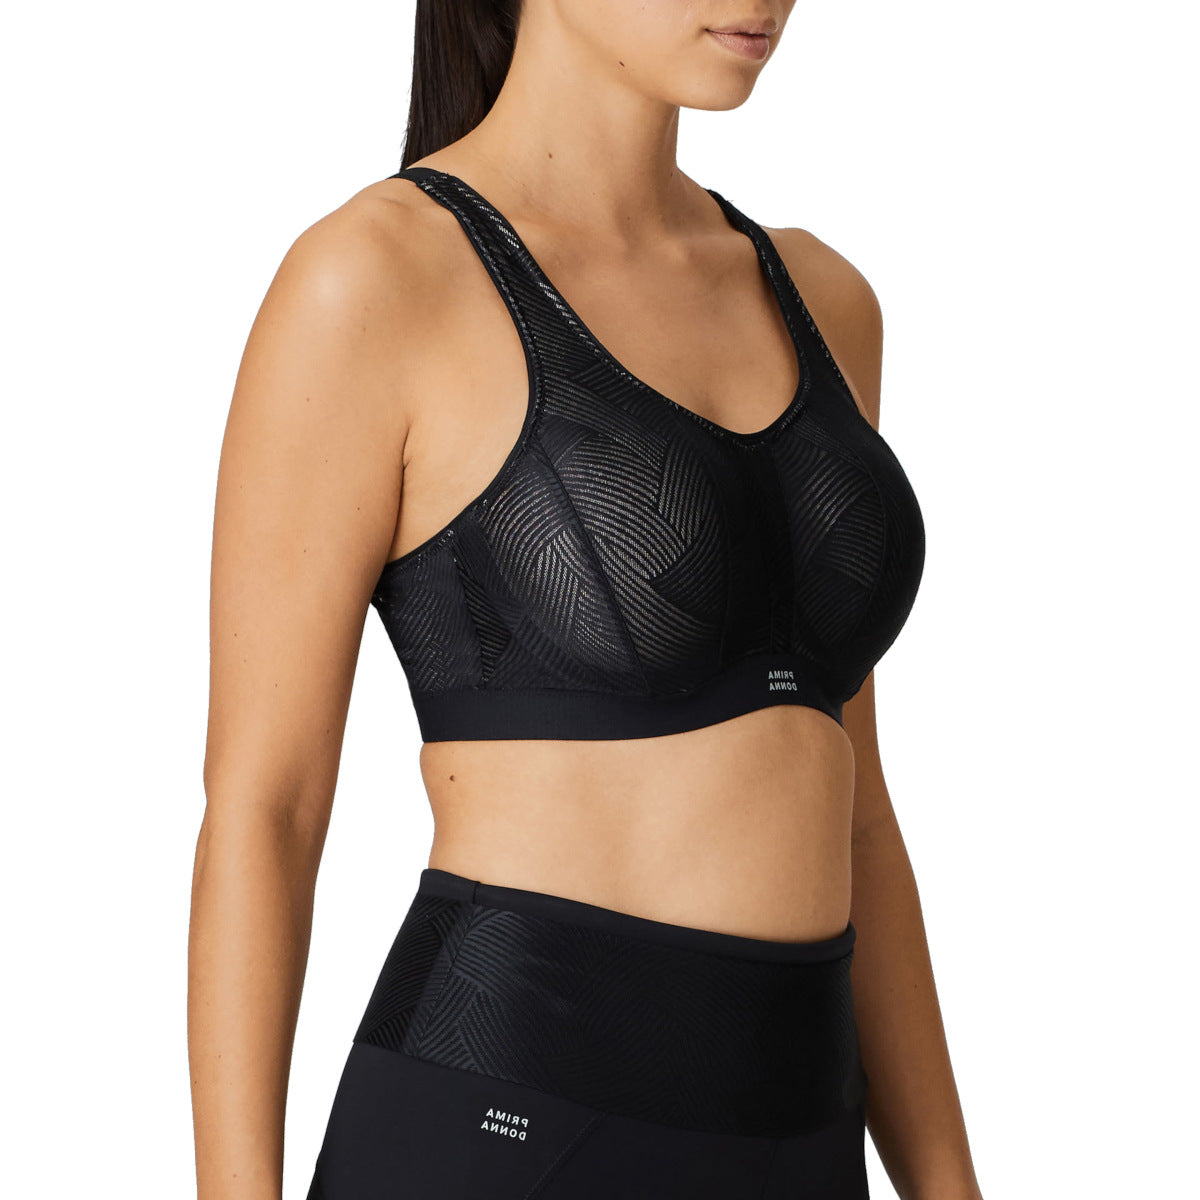 Introducing The Featherweight Max Sports Bra—a classic in the